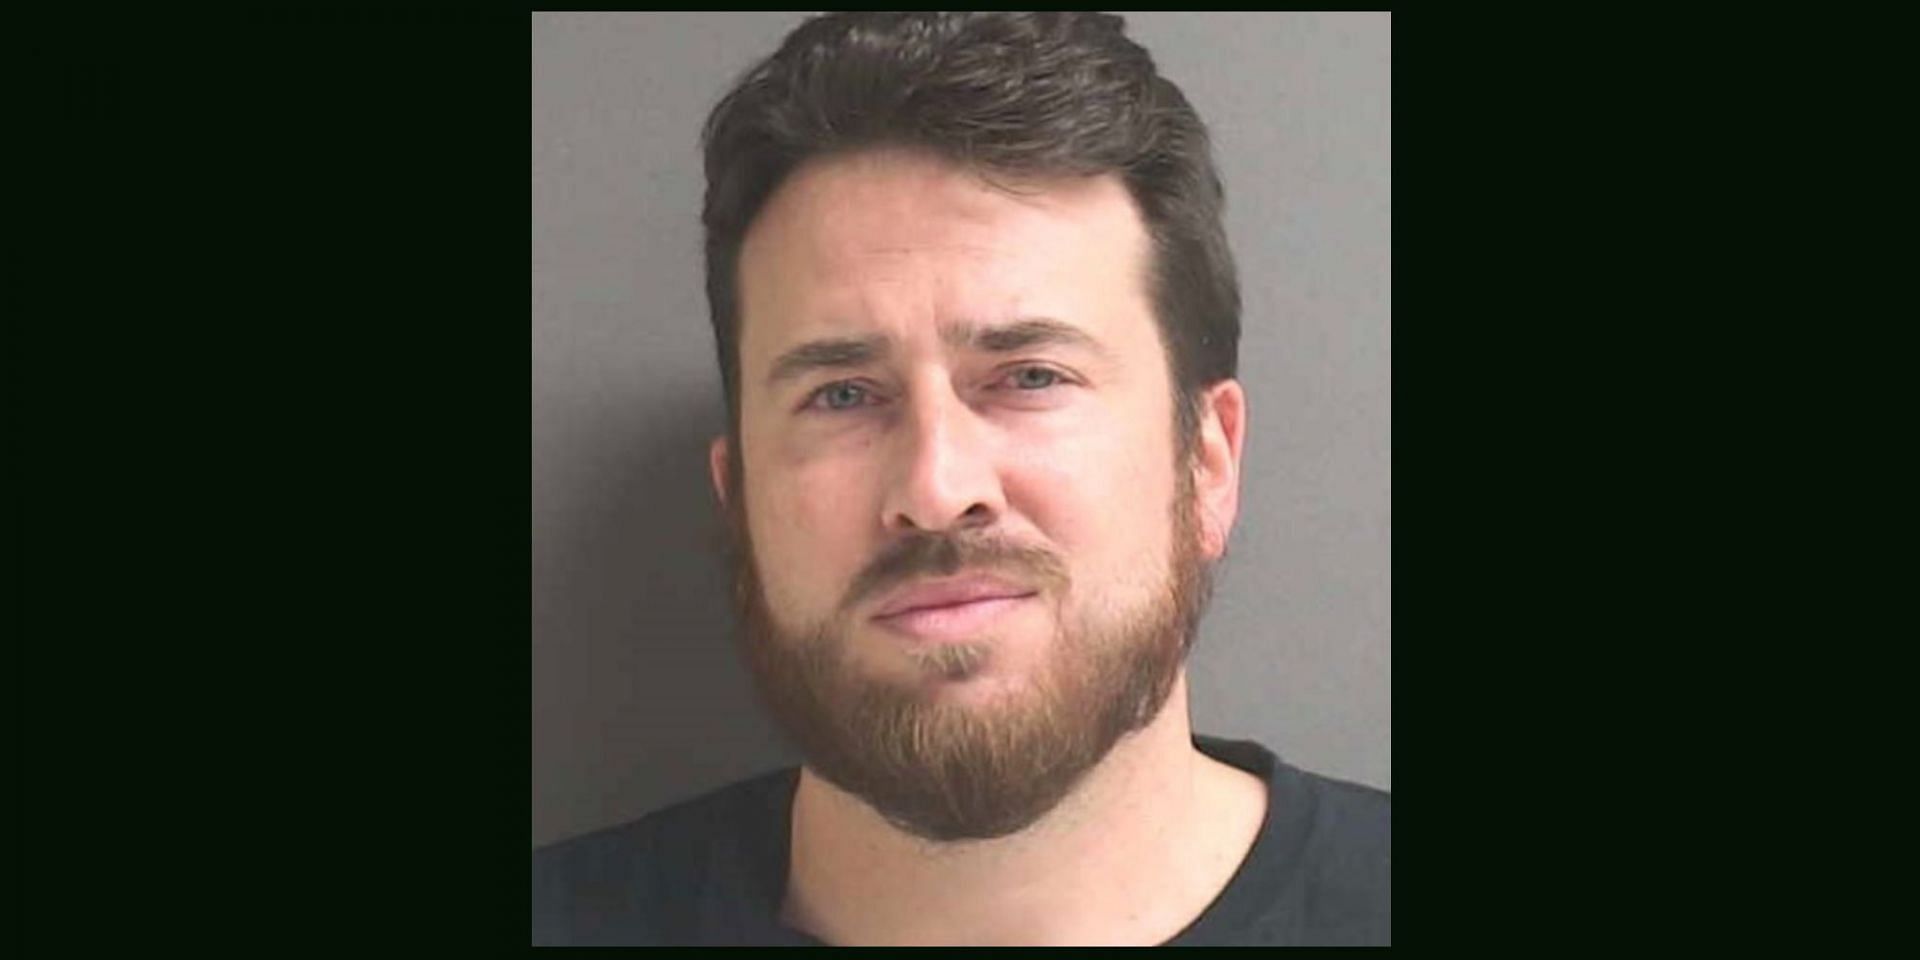 Details explored about Arin Hankerd, an Atlantic High School teacher who was recently arrested for allegedly having a s*xual relationship with a student. (Image via Facebook)